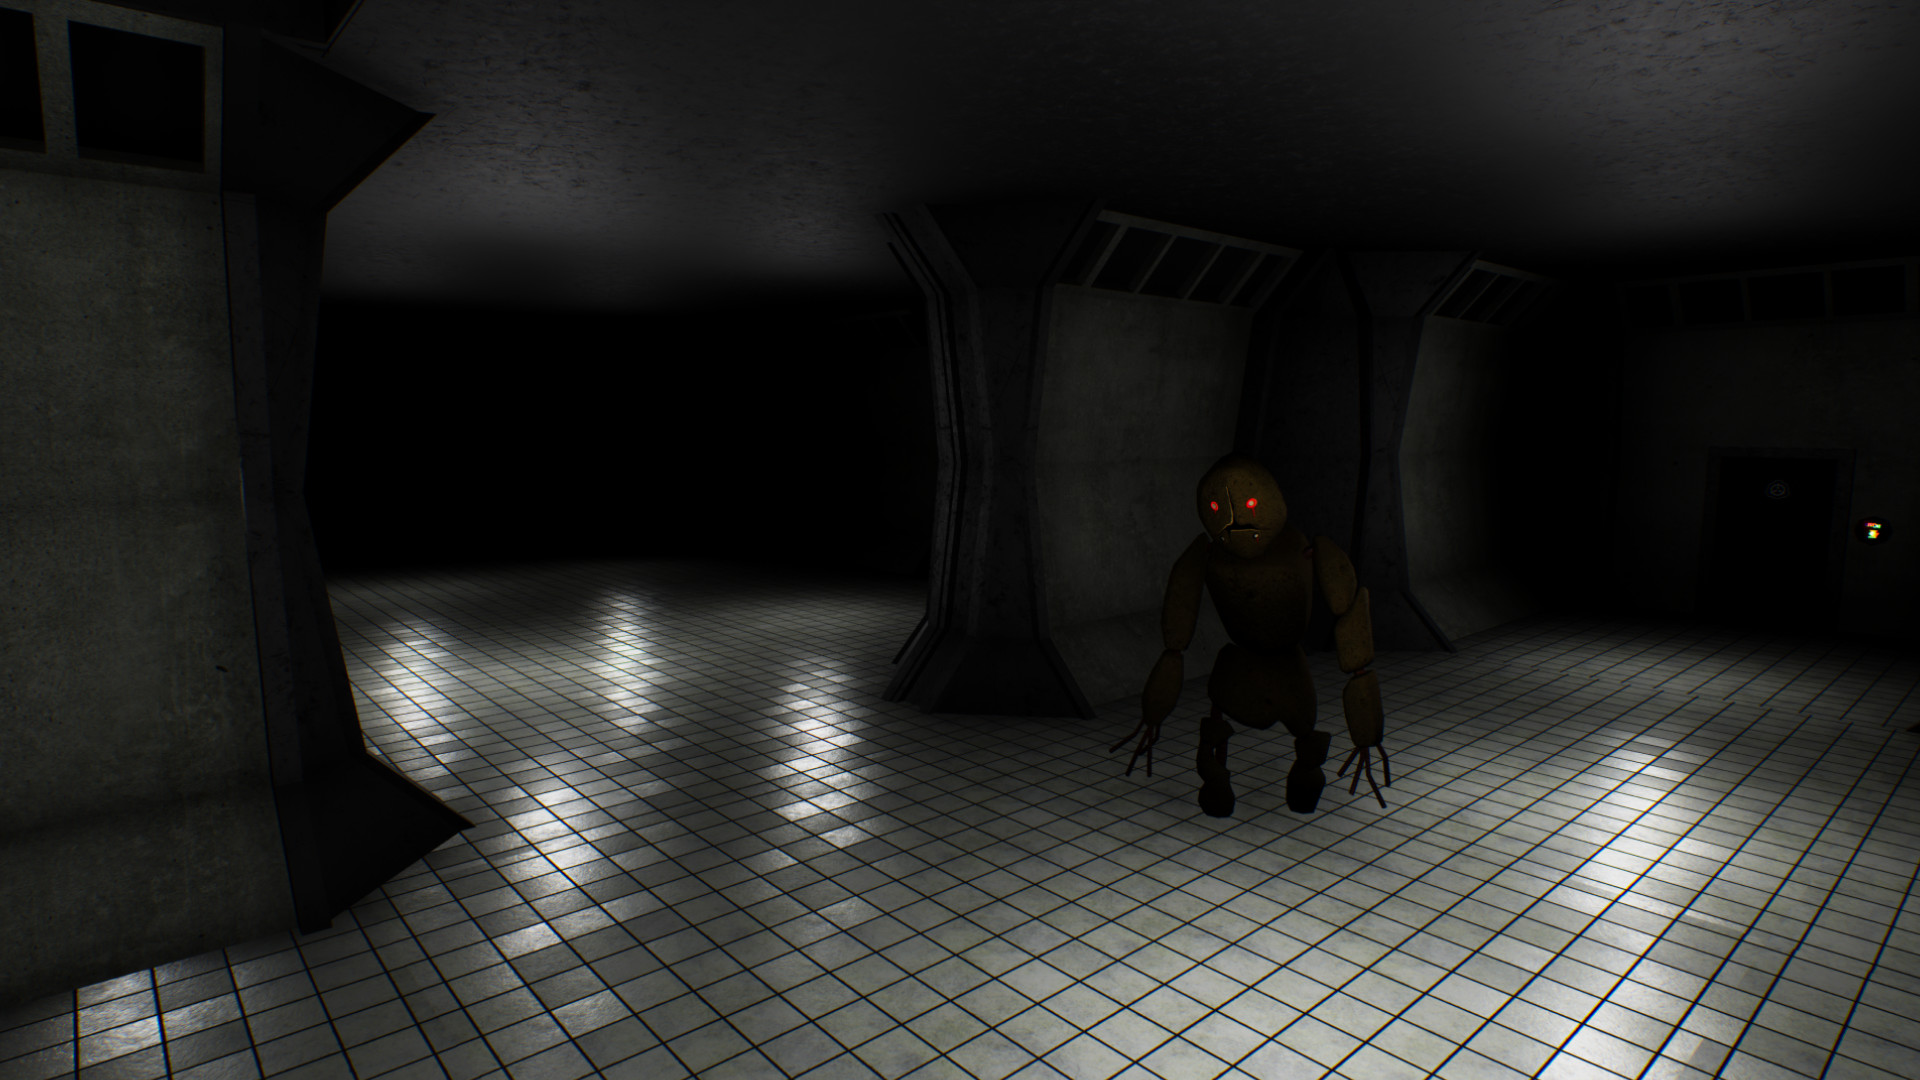 New guard model (Scp Multiplayer) 